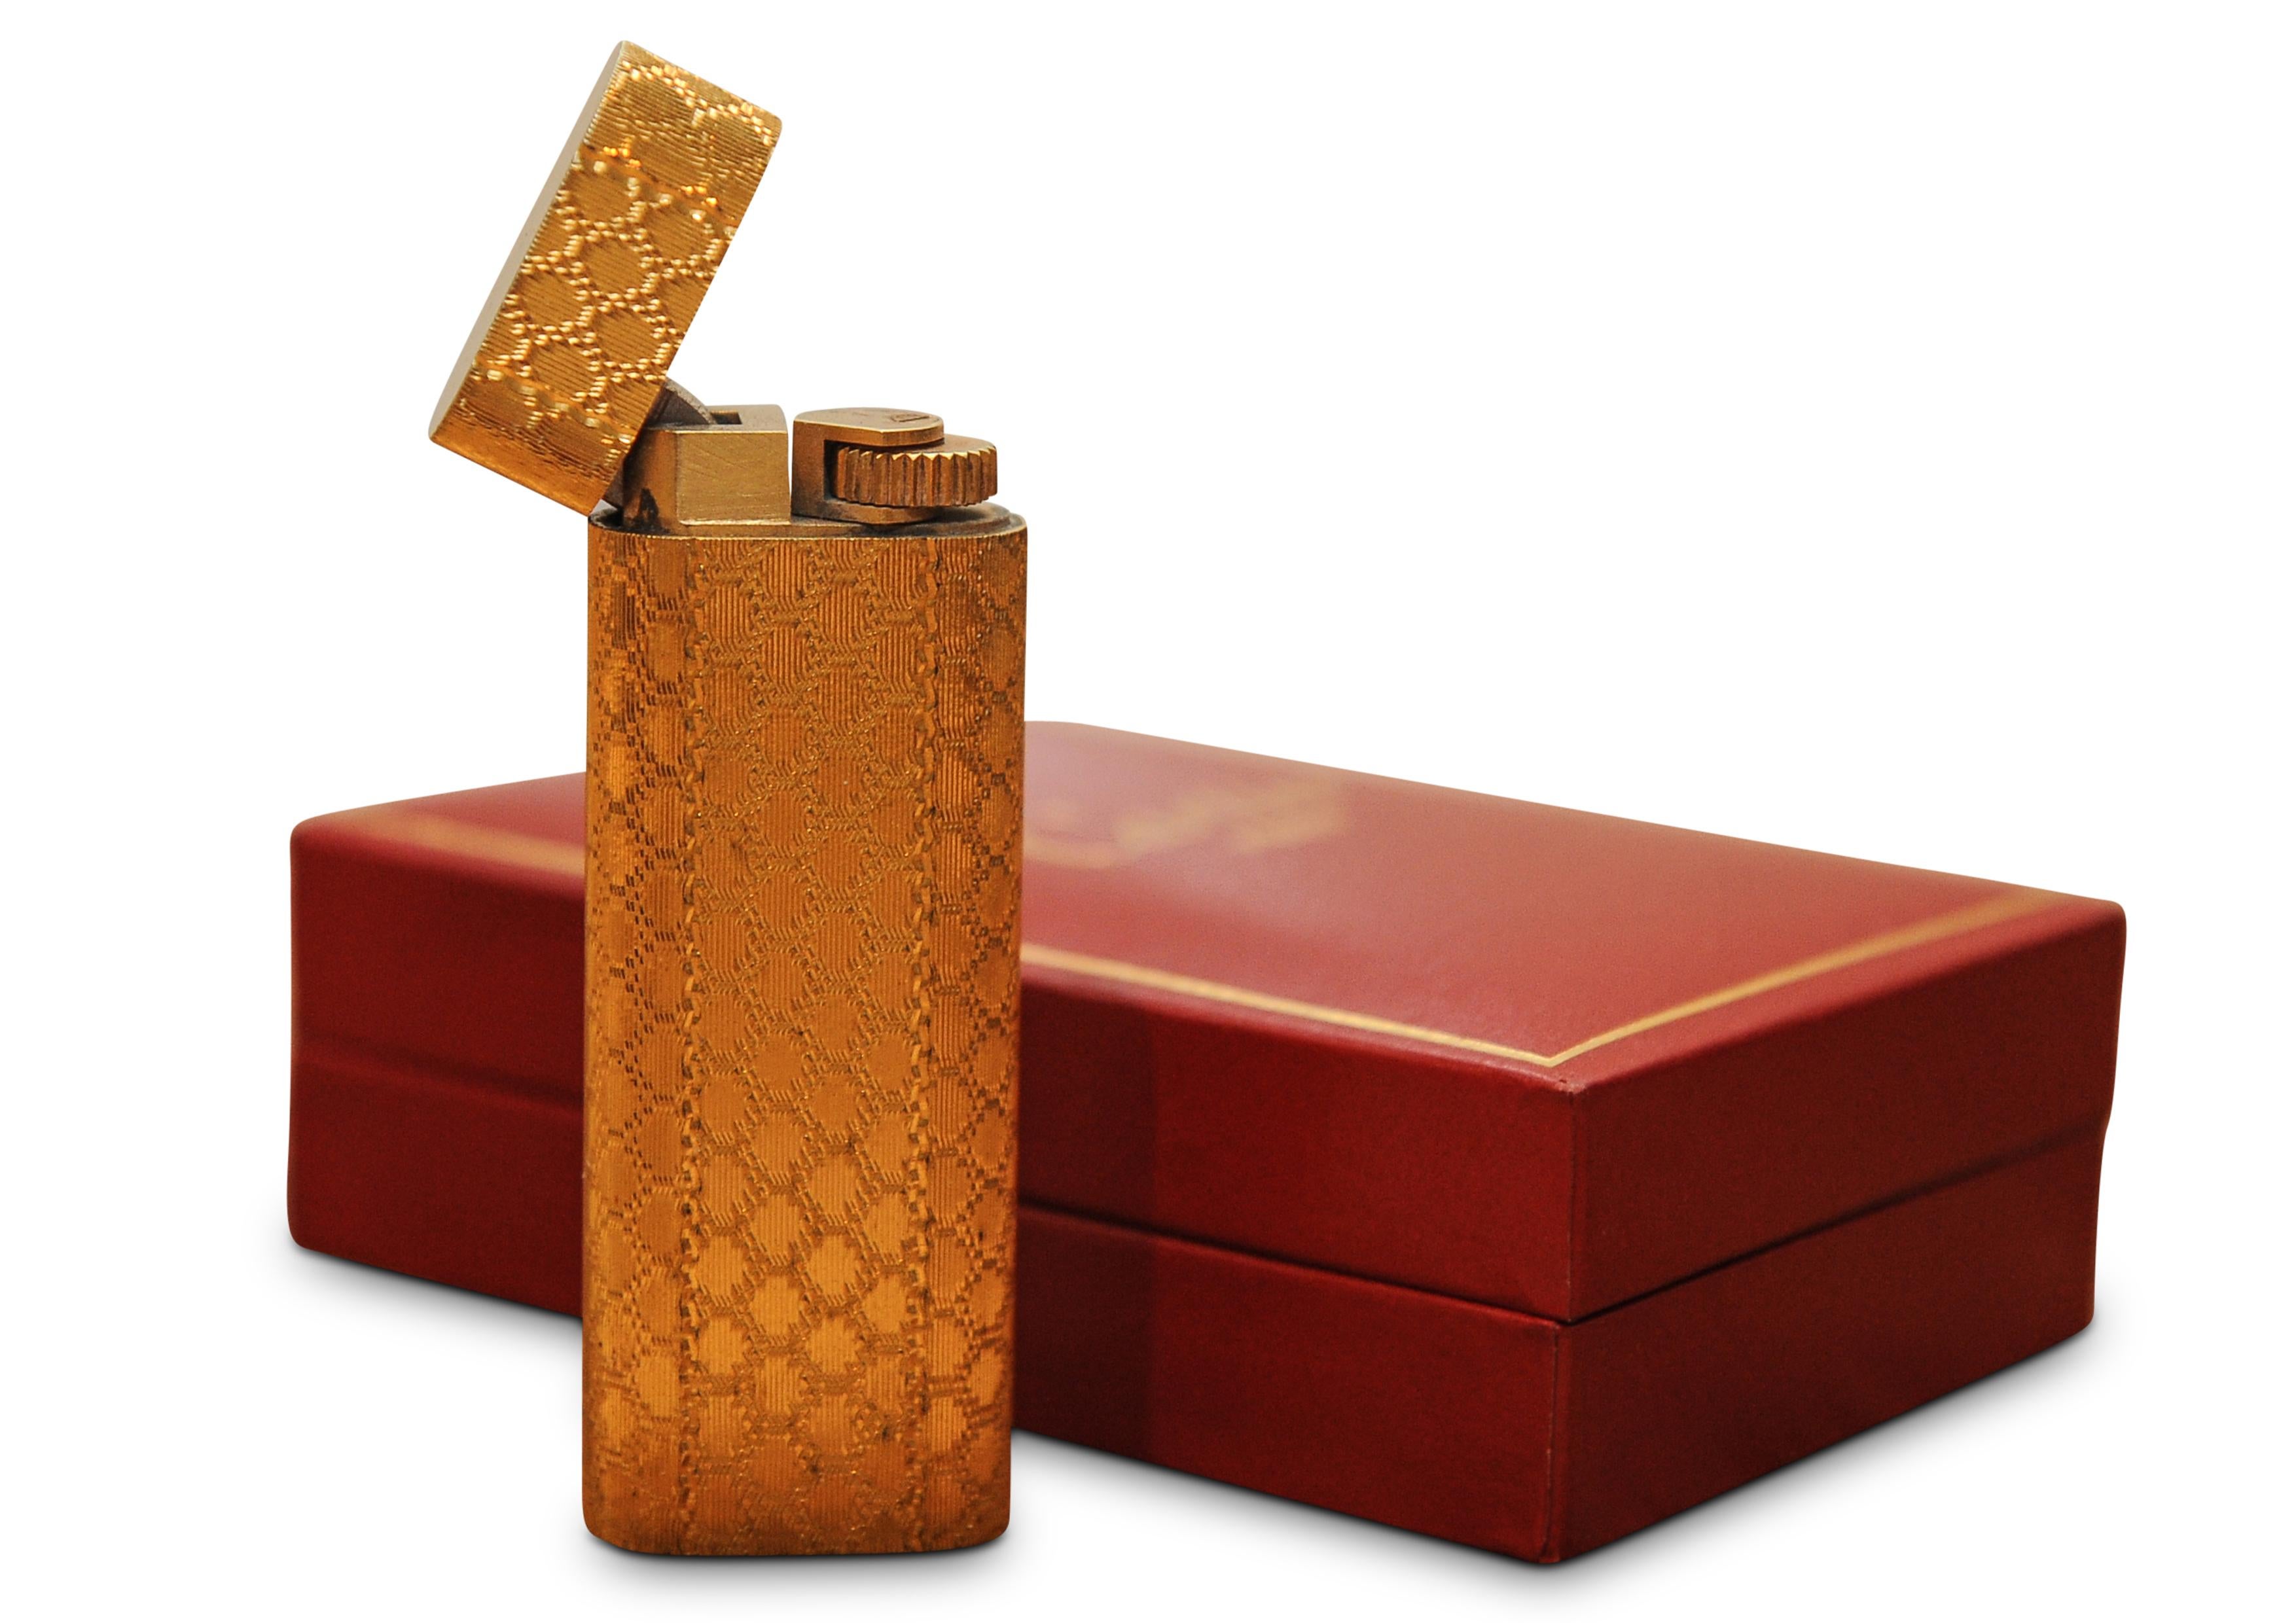 Cartier Briquet Gas Gilt Cigarette Lighter With Original Box and Partial Travelling Kit Made in France 1978

With original paperwork, flints etc gas bottle in travelling kit is empty.

